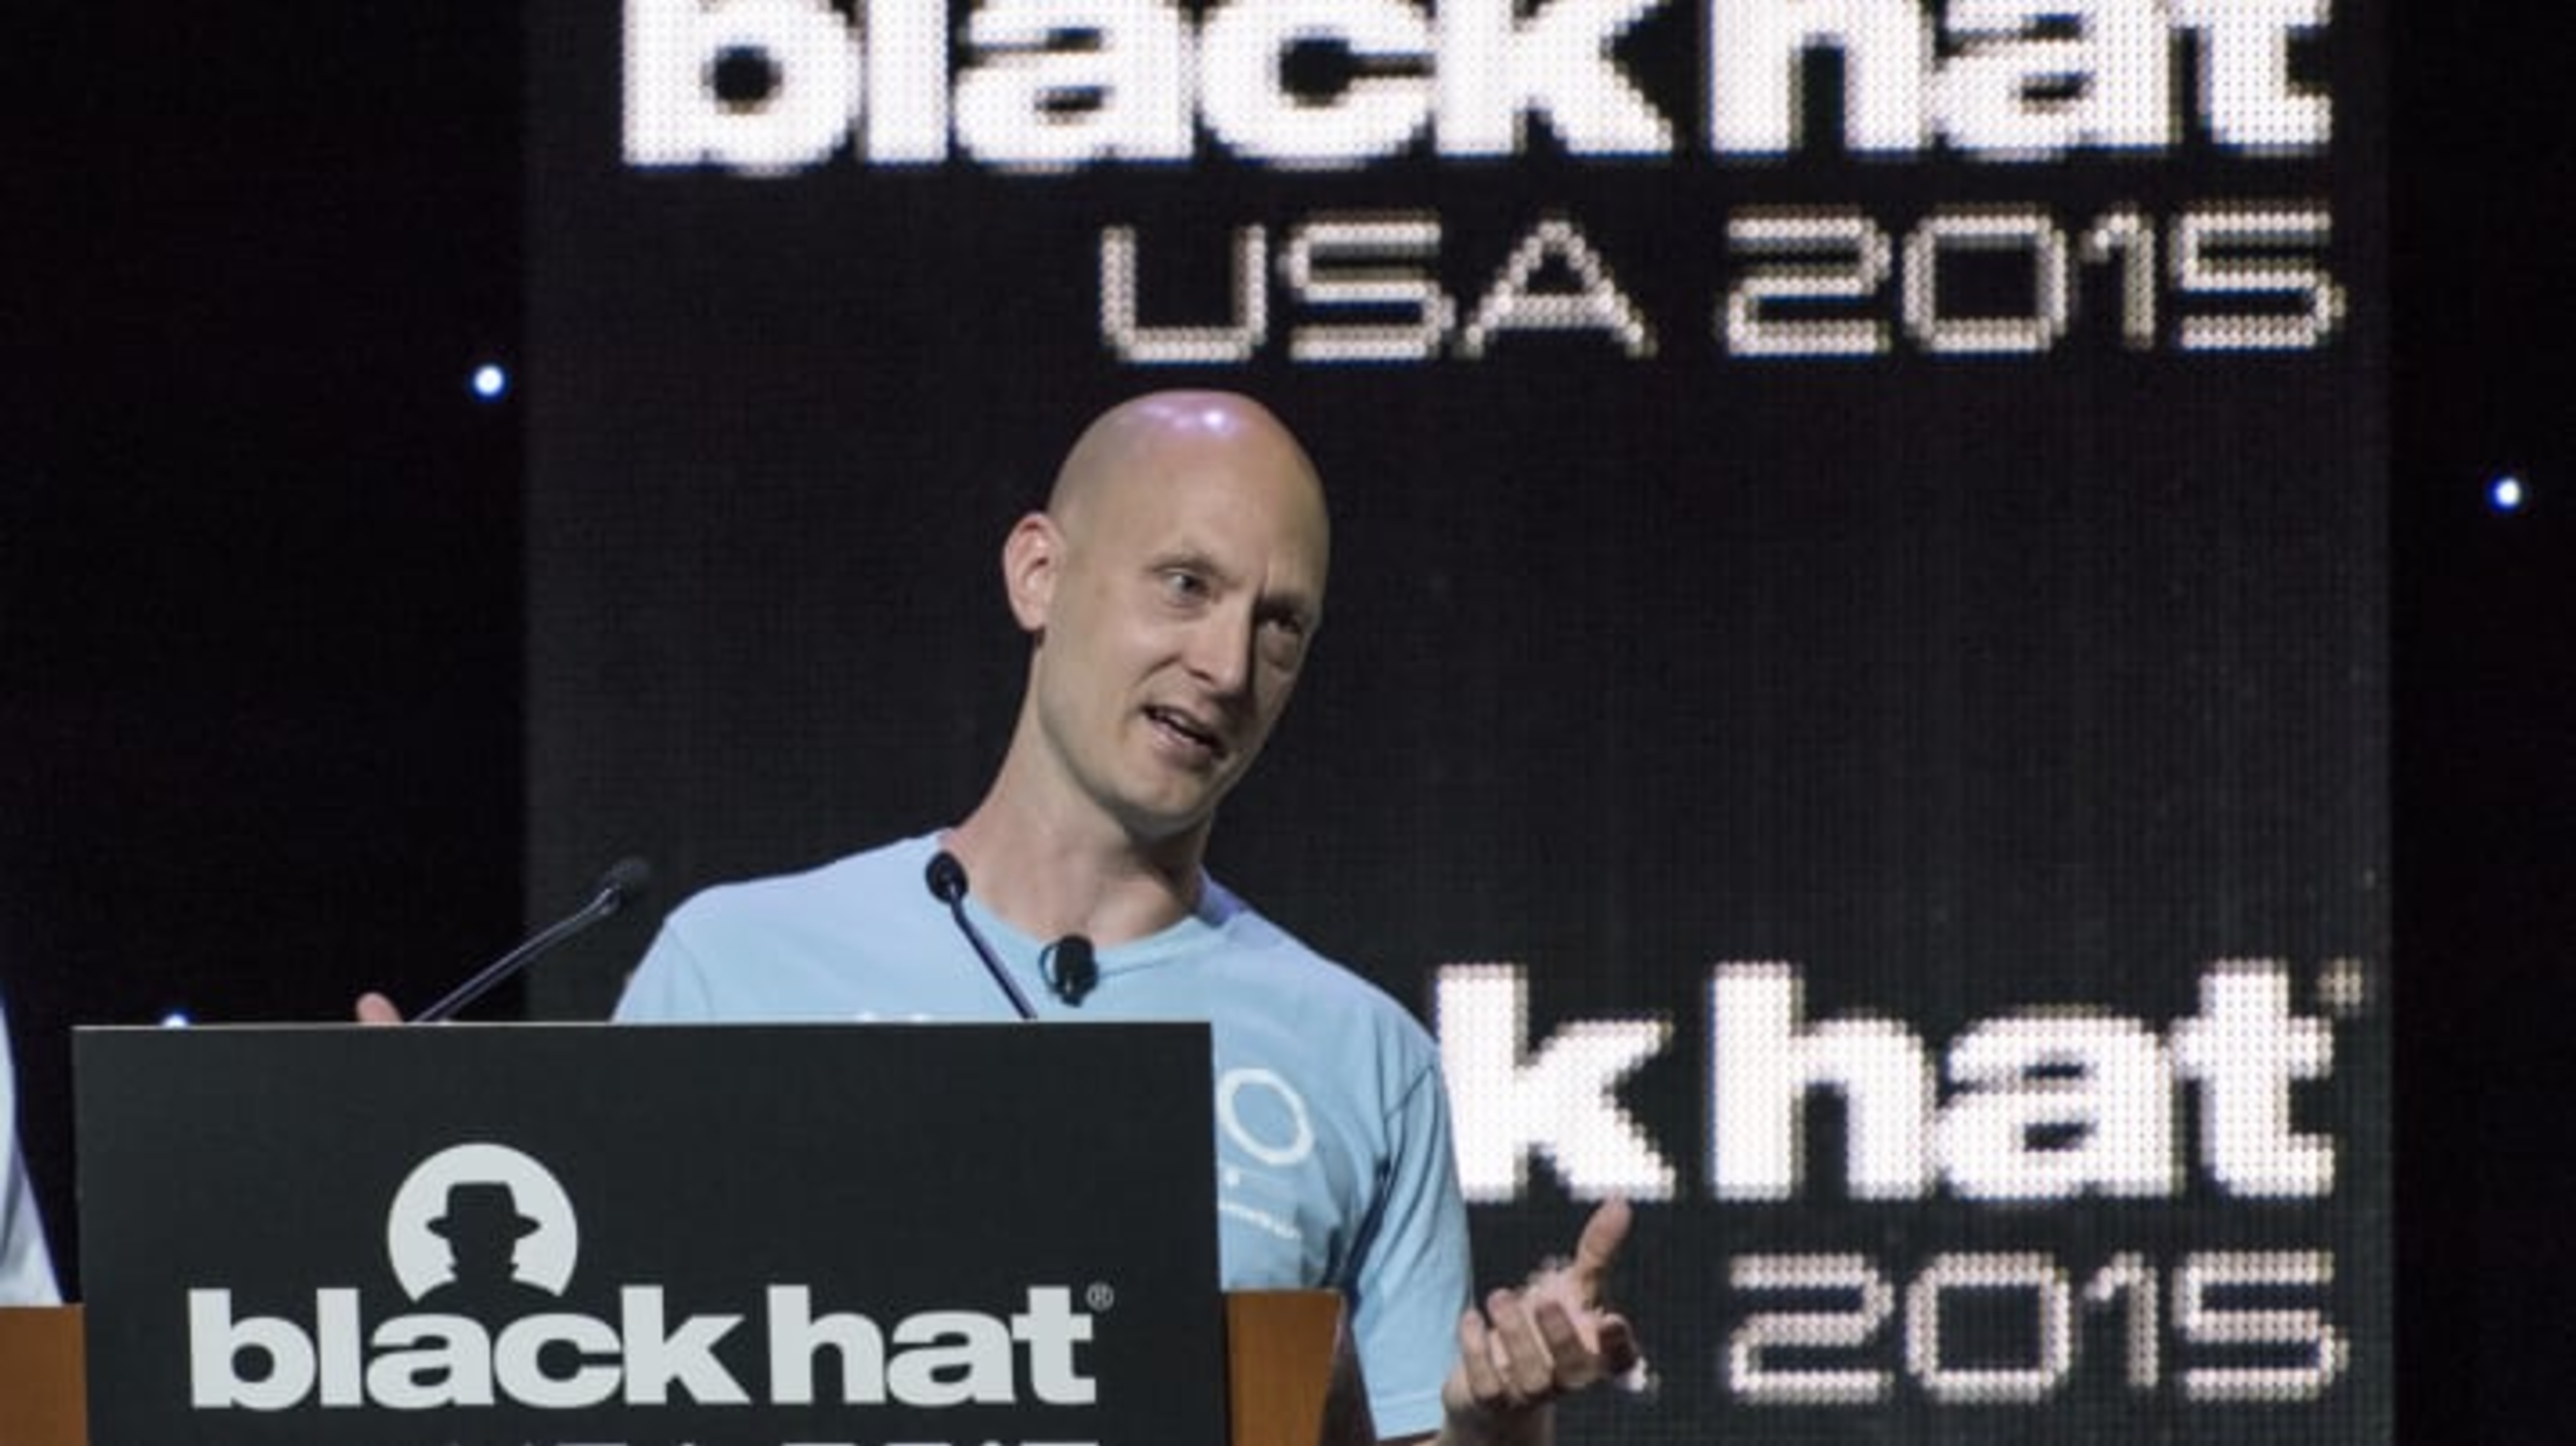 Remote Exploitation Of An Unaltered Passenger Vehicle At The Black Hat Conference